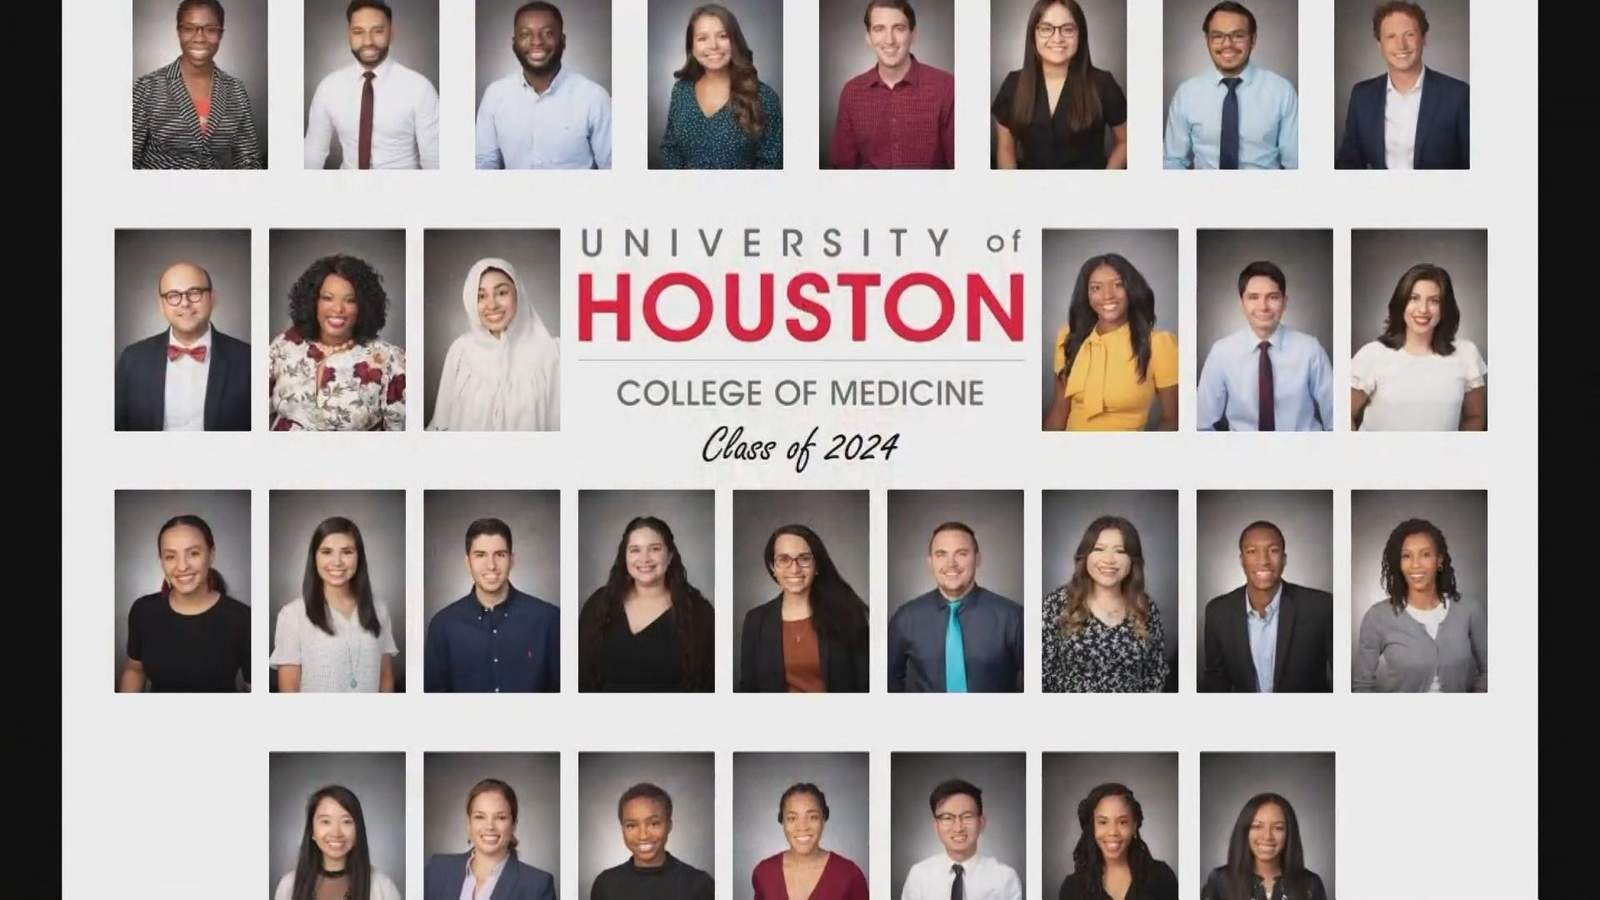 University of Houston College of Medicine welcomes first class, aims to tackle healthcare disparities